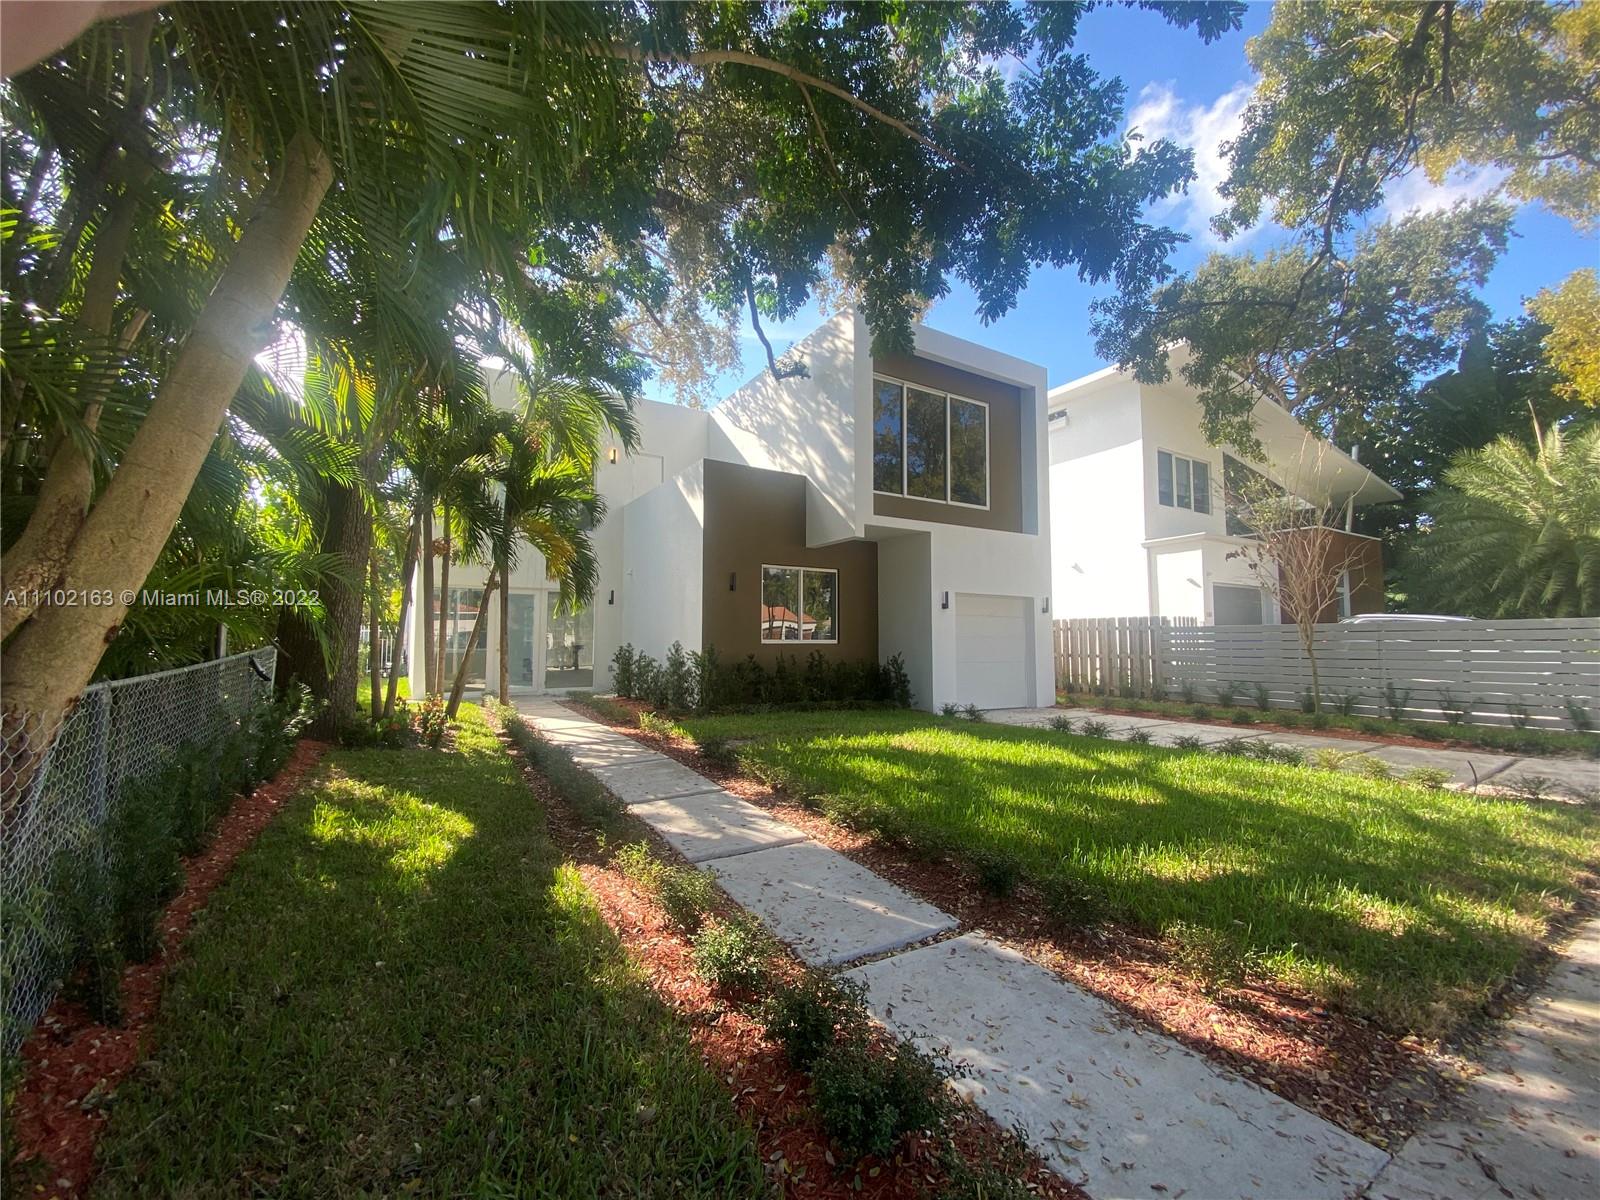 Photo 1 of 1816 23RD ST in Miami - MLS A11102163